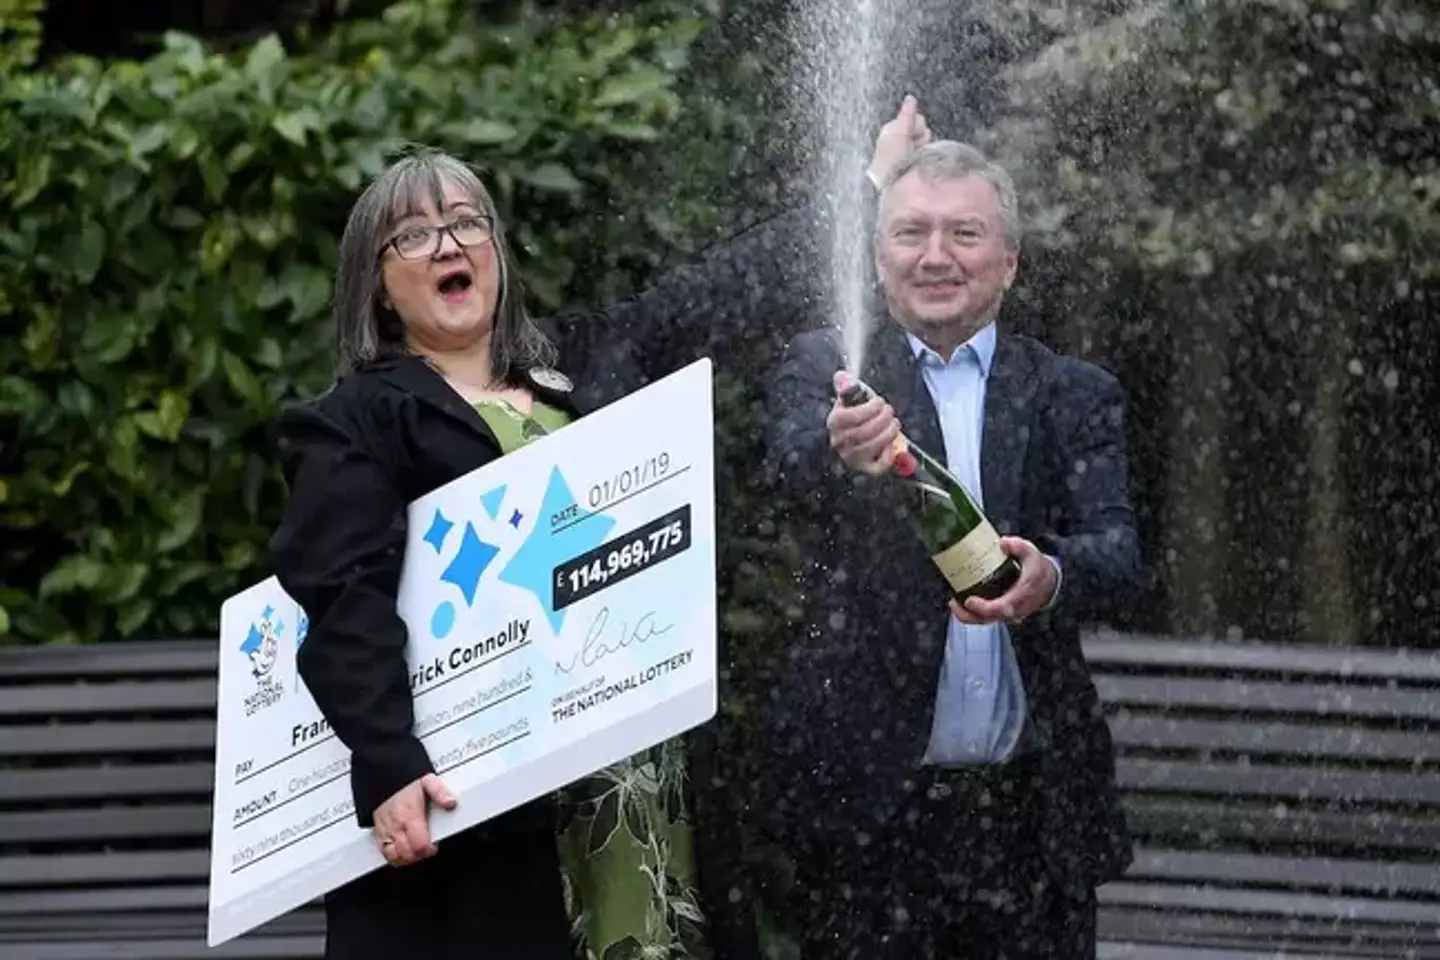 Frances Connolly won a whopping £115m on the EuroMillions in 2019.